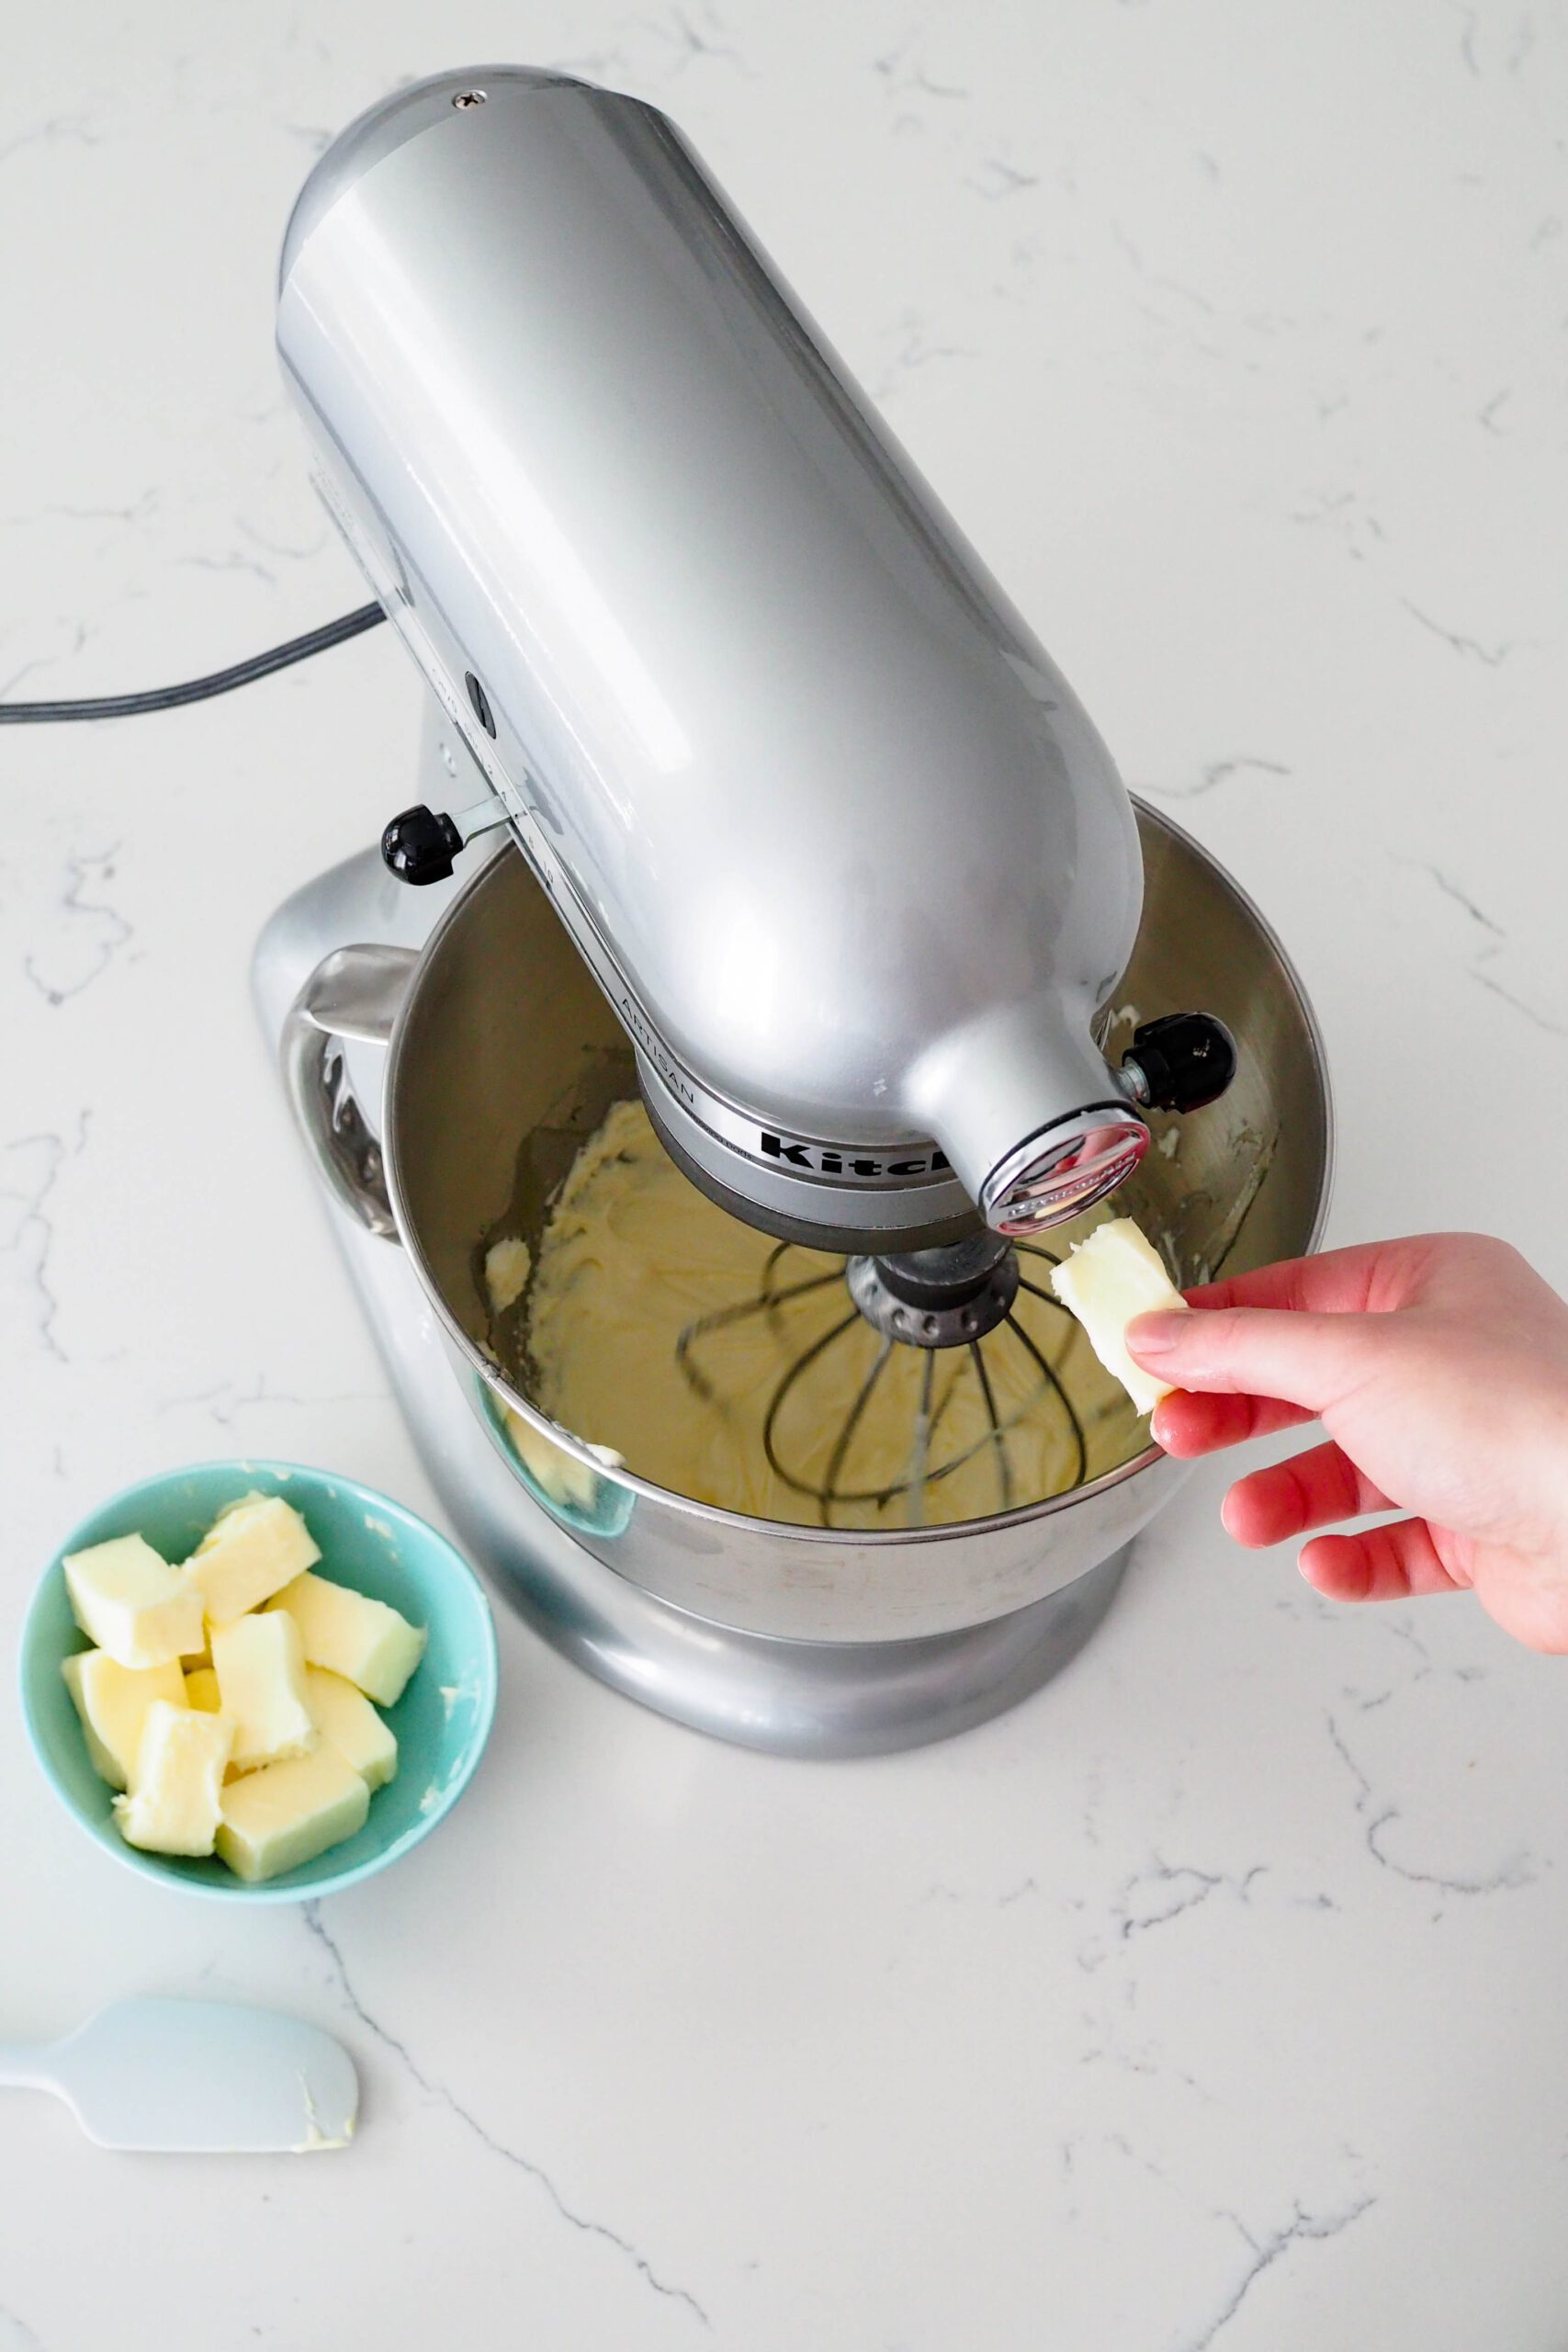 A hand holds a small piece of butter in front of a mixer with a whisk attachment.